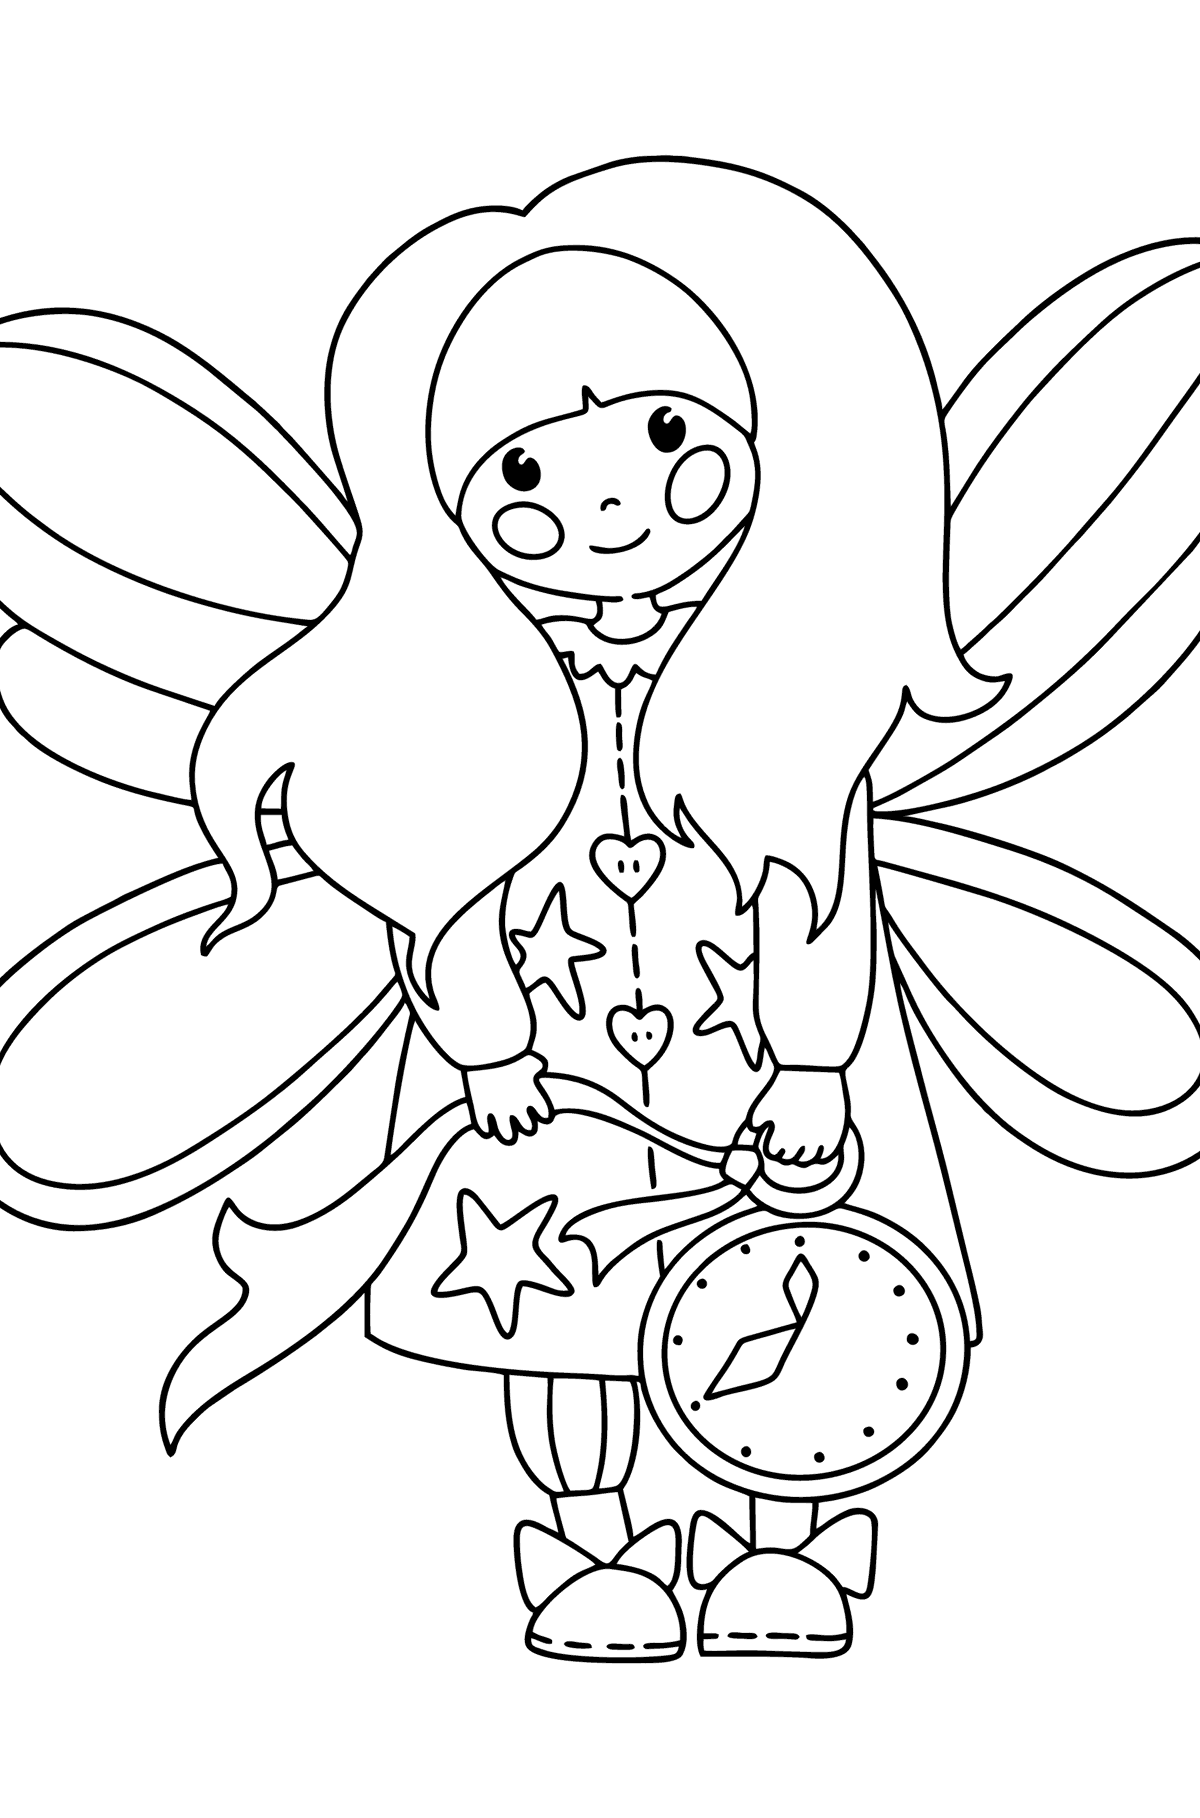 Sweet Fairy coloring page - Coloring Pages for Kids